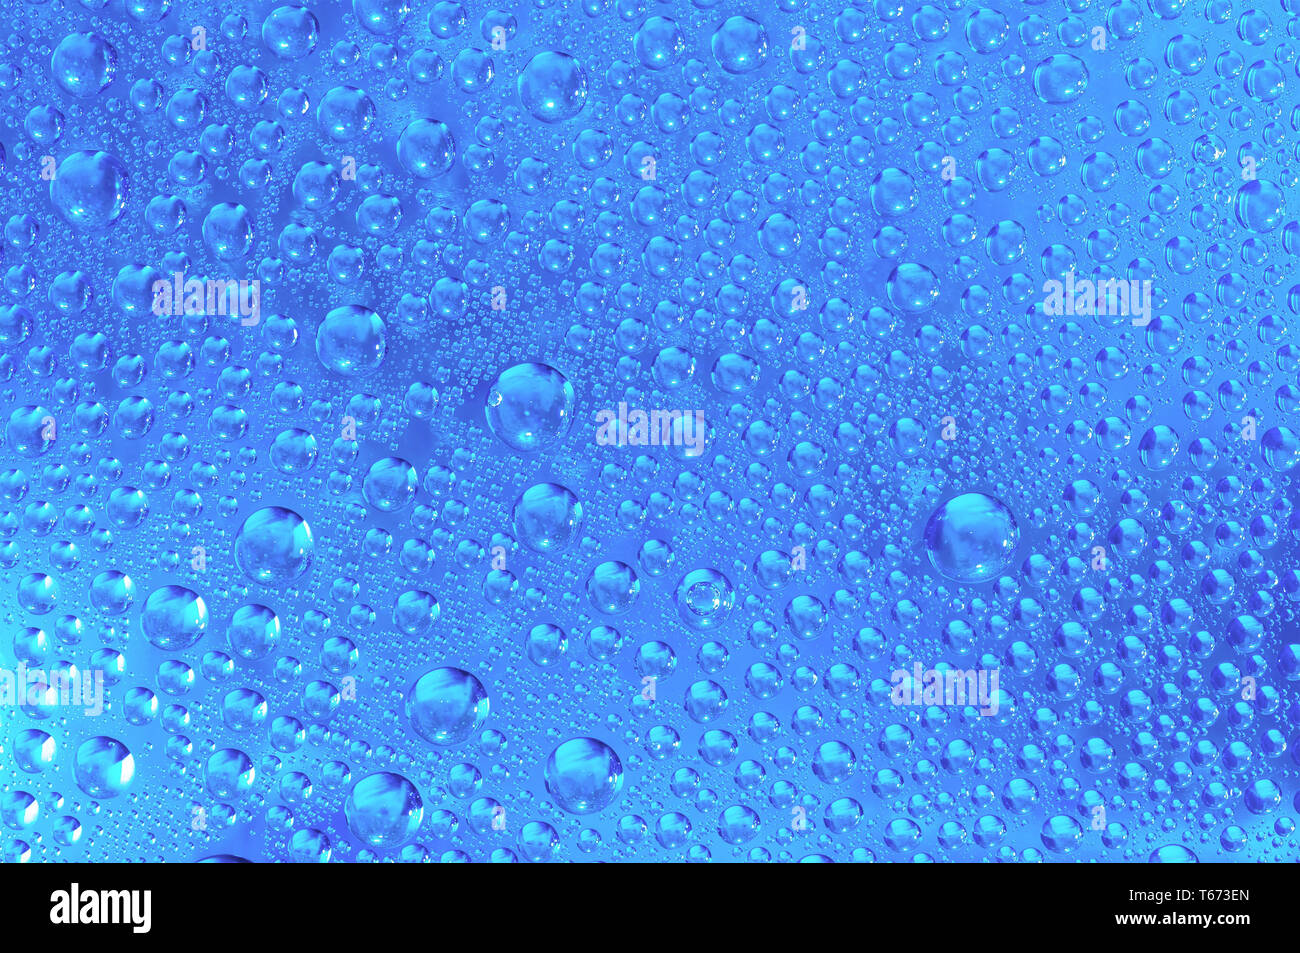 blue wet rainy background, water drops on transparent glass Stock Photo